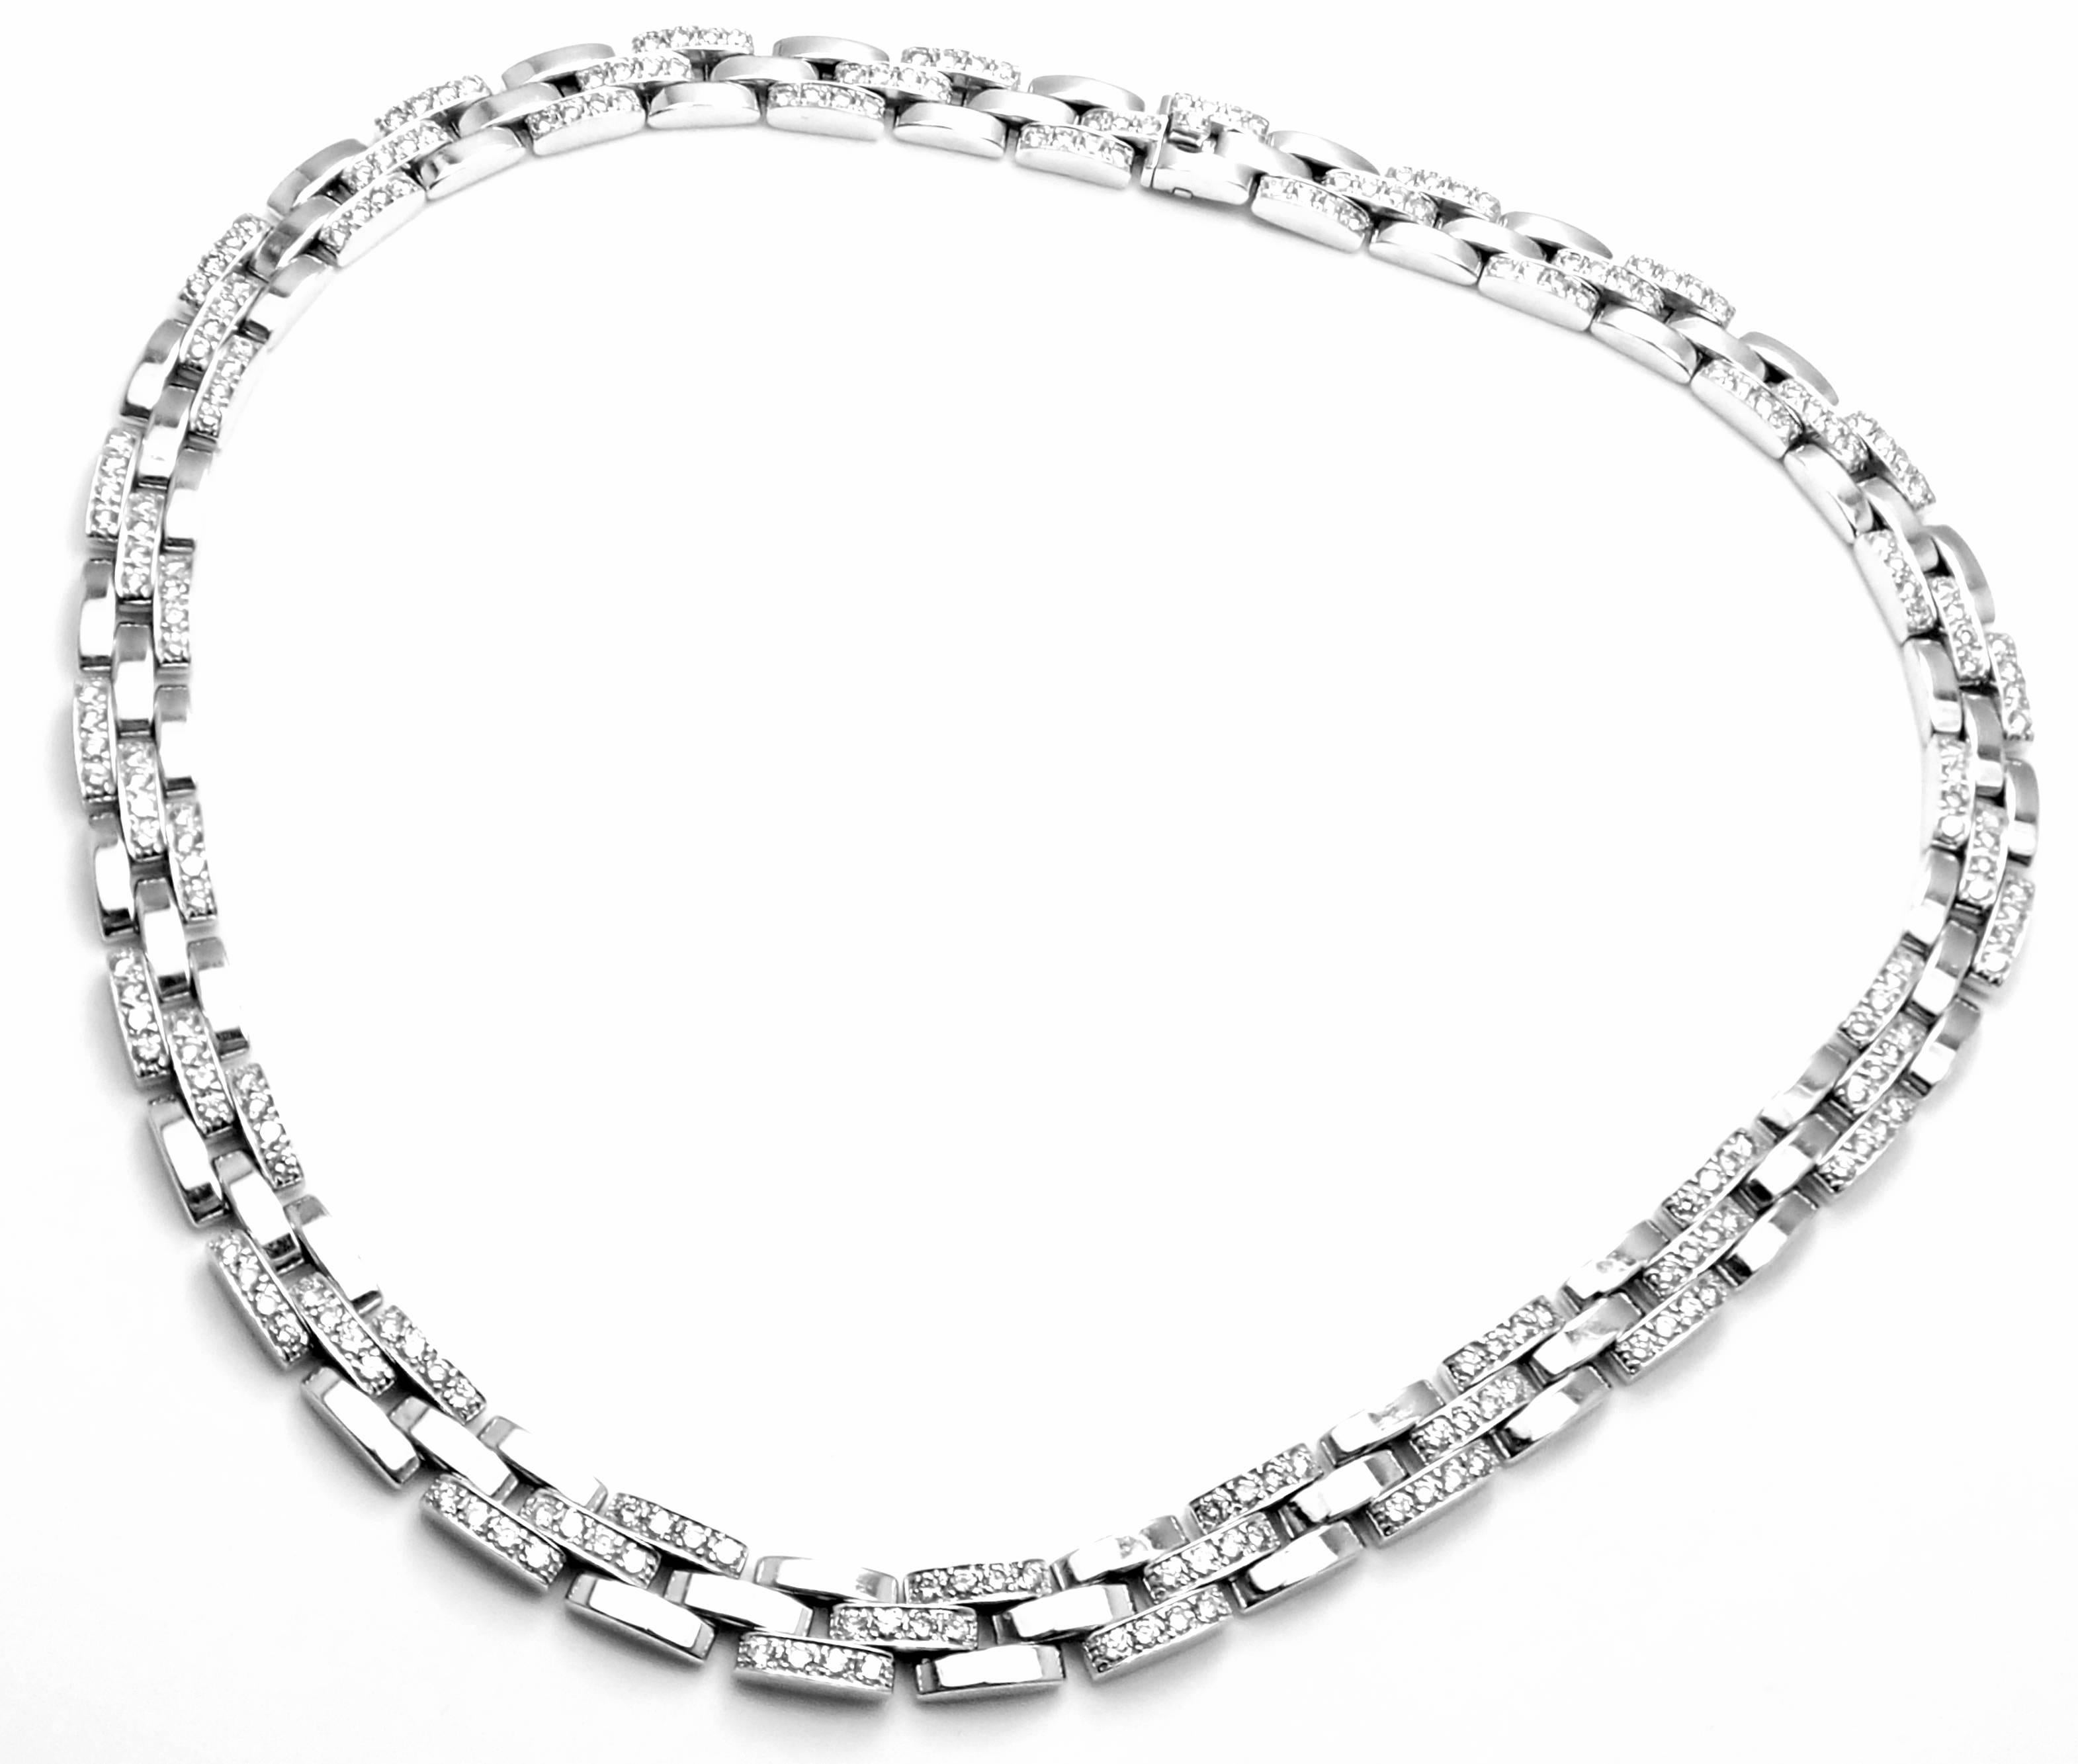 18k White Gold Diamond Maillon Panthere Necklace by Cartier. 
This necklace comes with an original Cartier box. 
With 240 round brilliant cut diamonds VVS1 clarity, E color total weight approx. 10ct
Details: 
Chain Length: 17'' 
Width: 9mm
Weight: